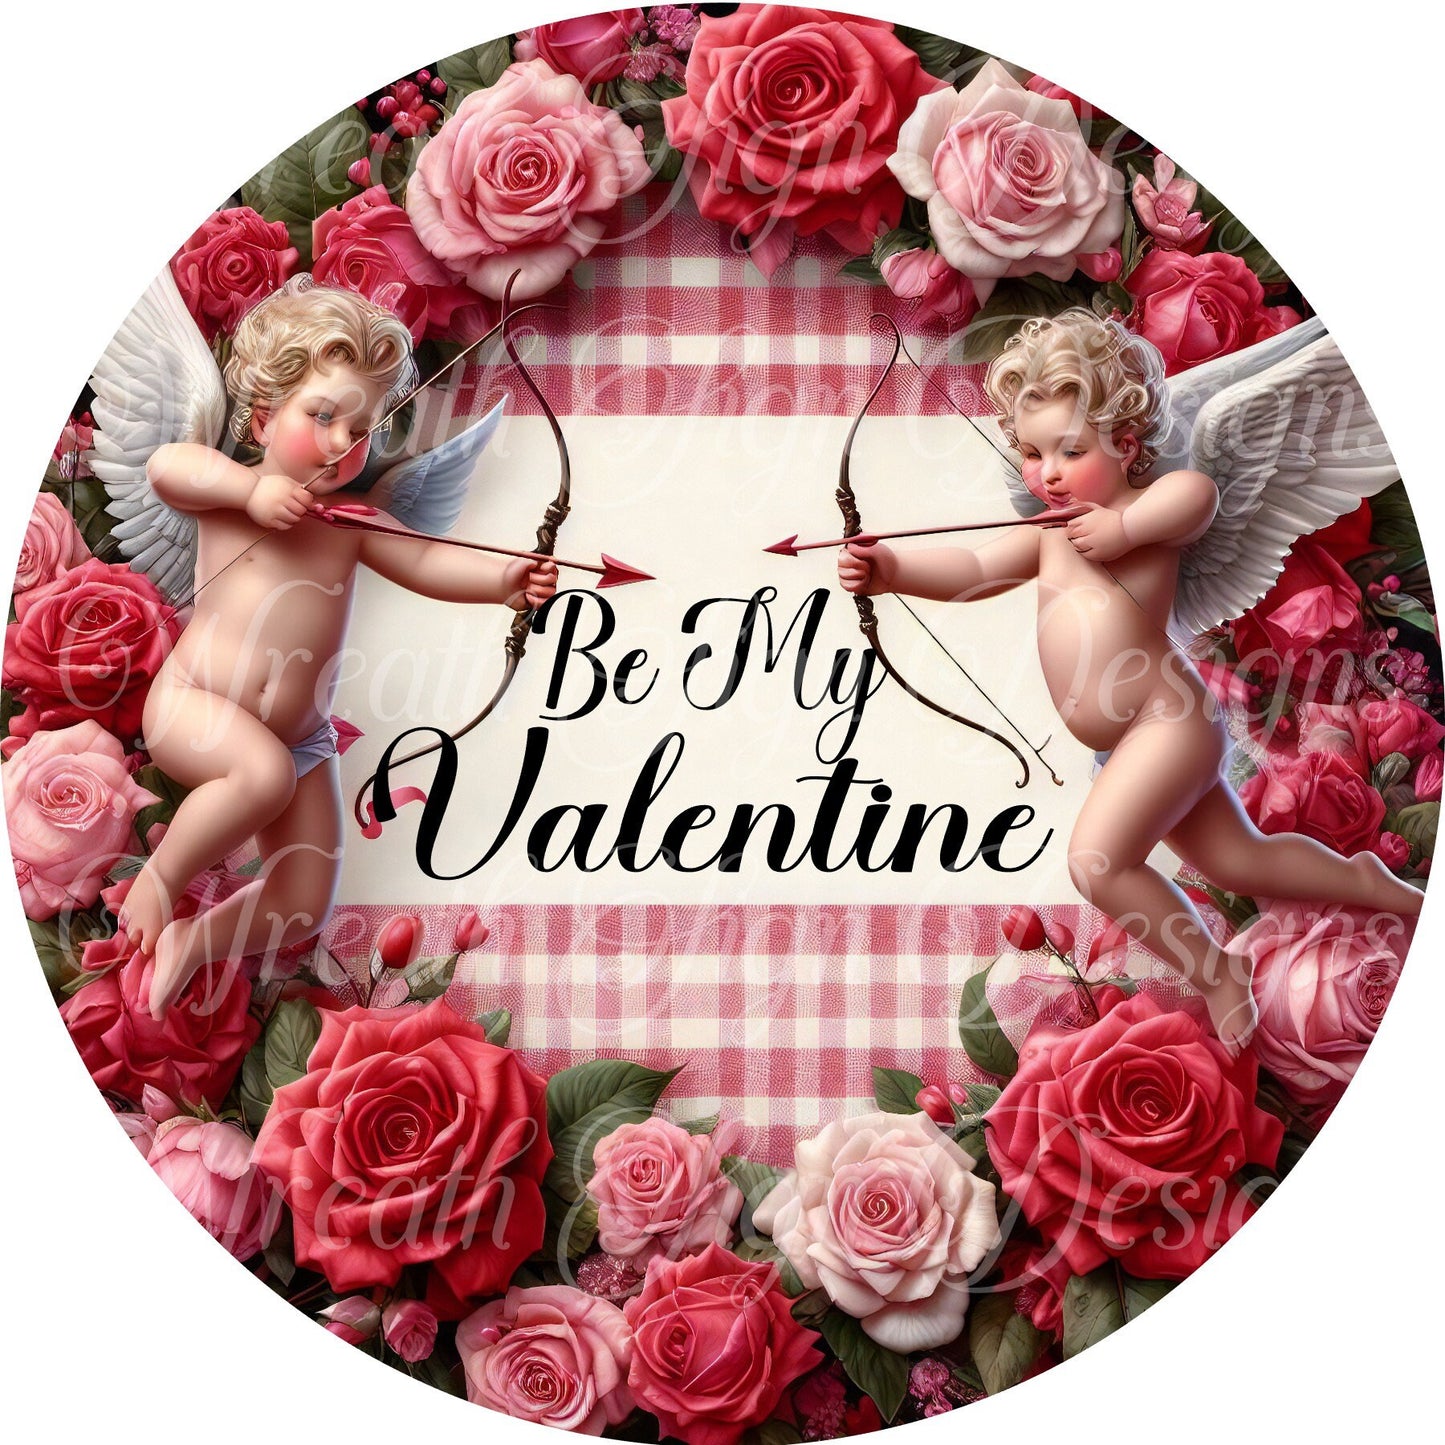 Be Mine Valentine&#39;s Day Cupid Heart wreath sign, Cherub with a bow wreath center, Rose wreath attchment, plaque